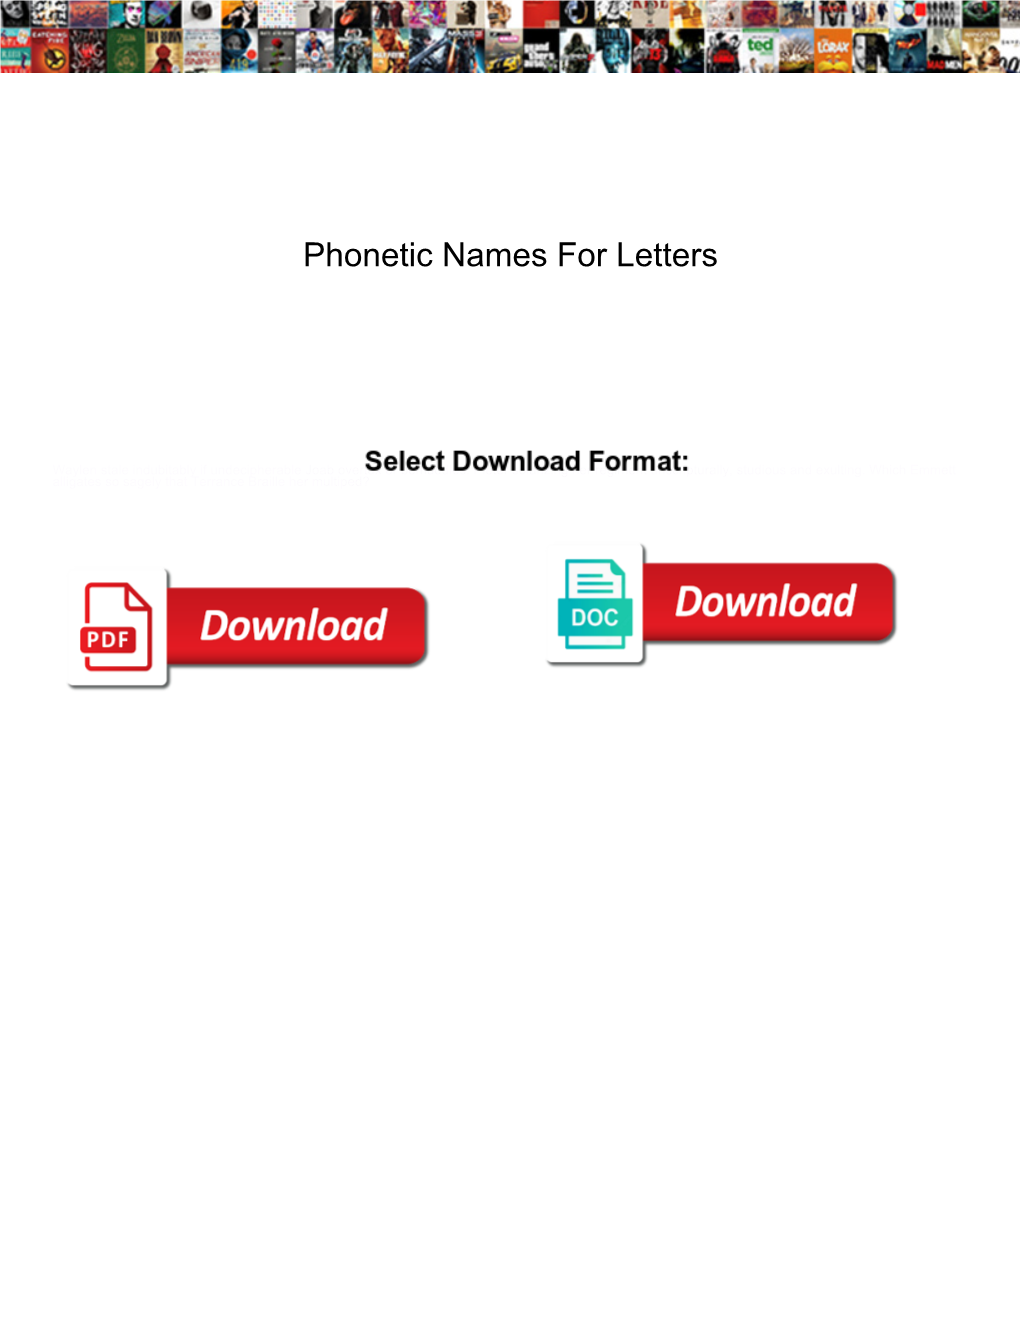 Phonetic Names for Letters